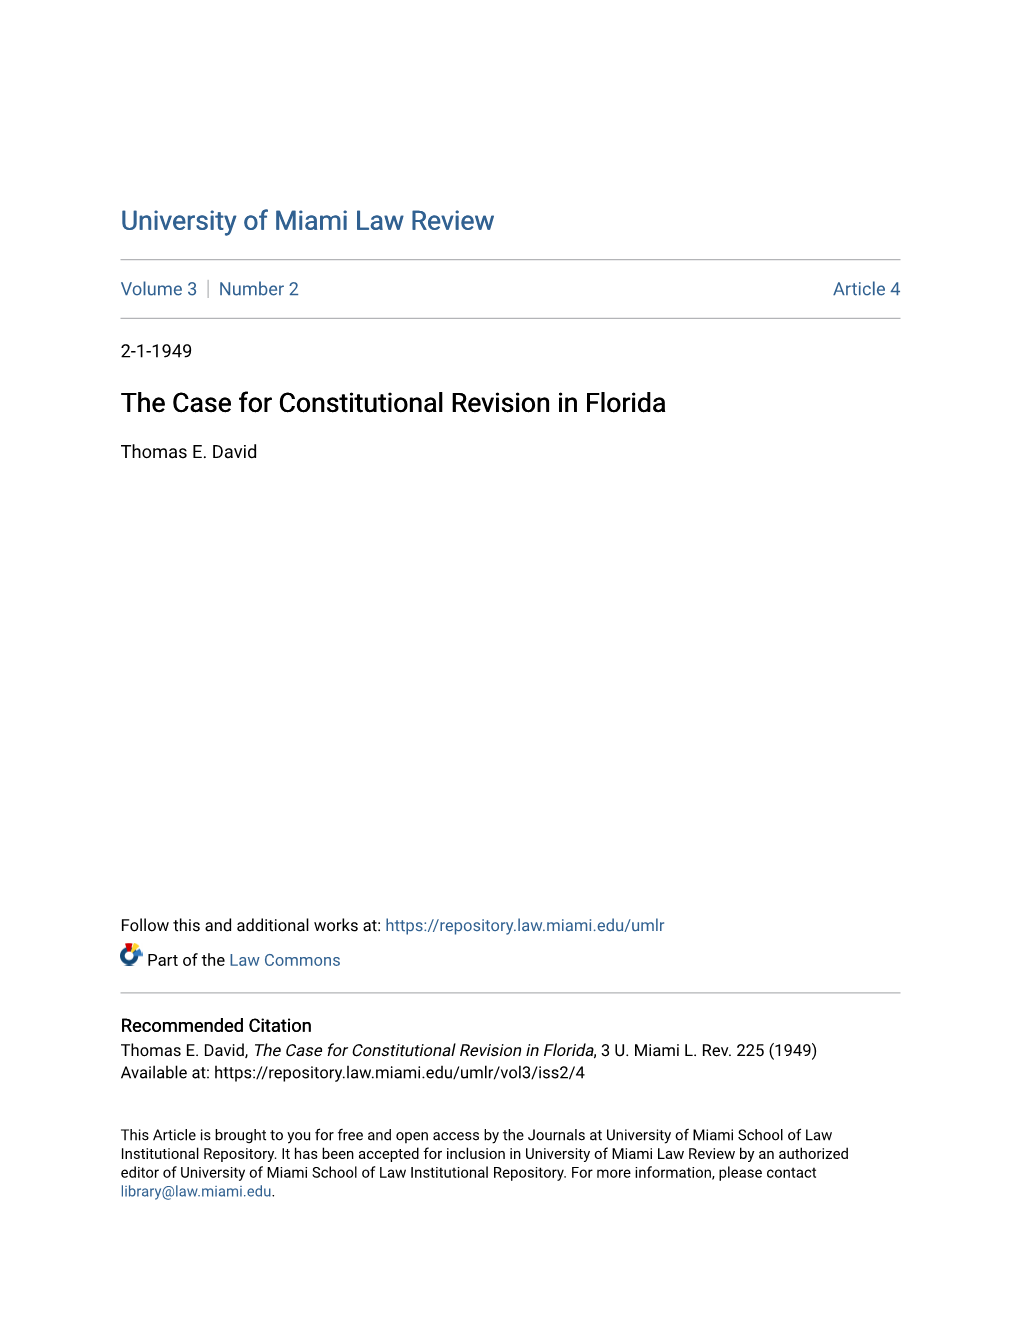 The Case for Constitutional Revision in Florida